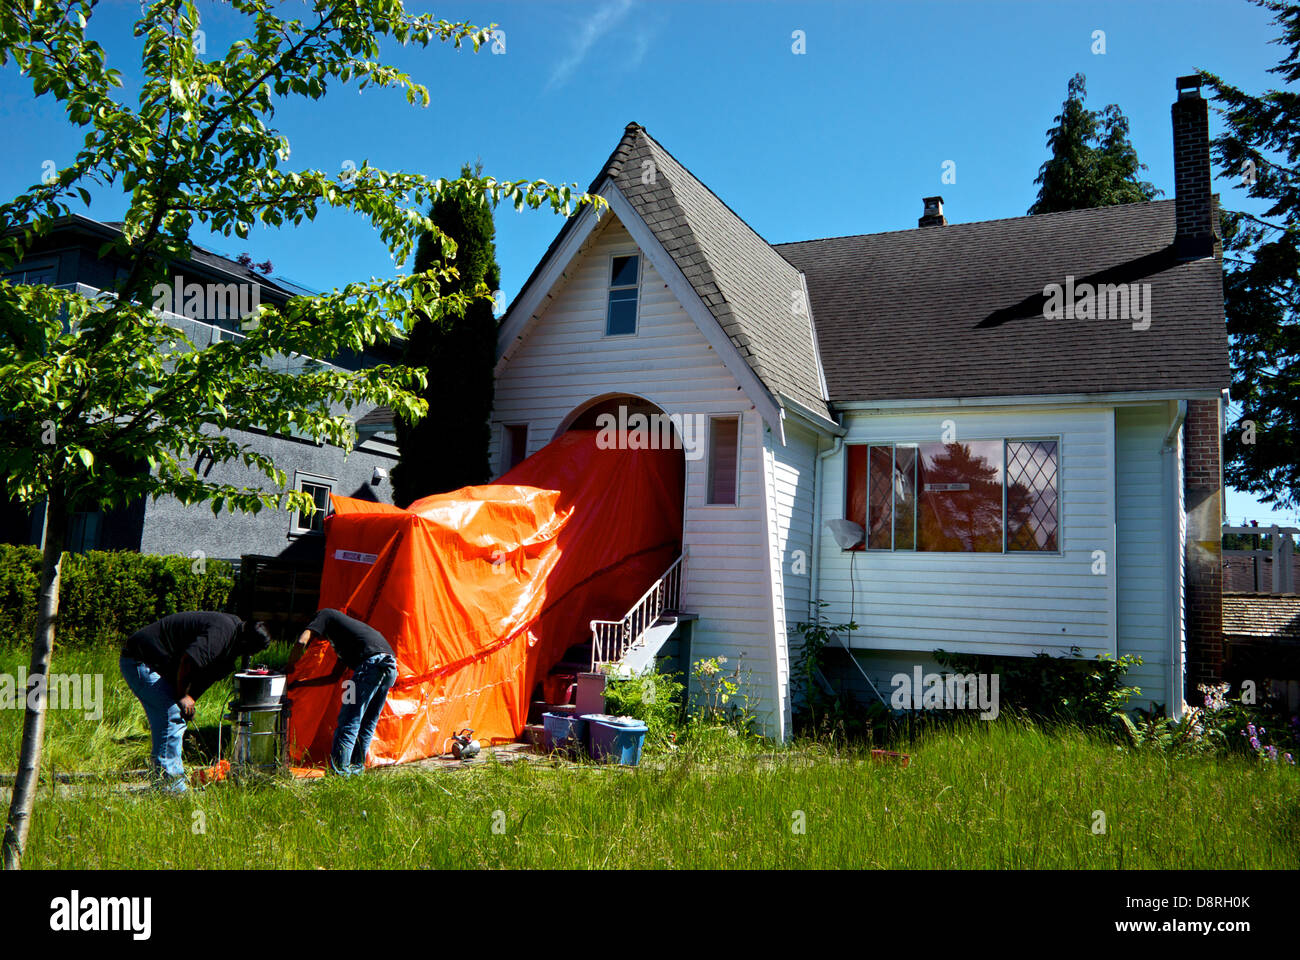 Contractor equipment asbestos removal from airtight sealed old Vancouver house slated for demolition redevelopment Stock Photo